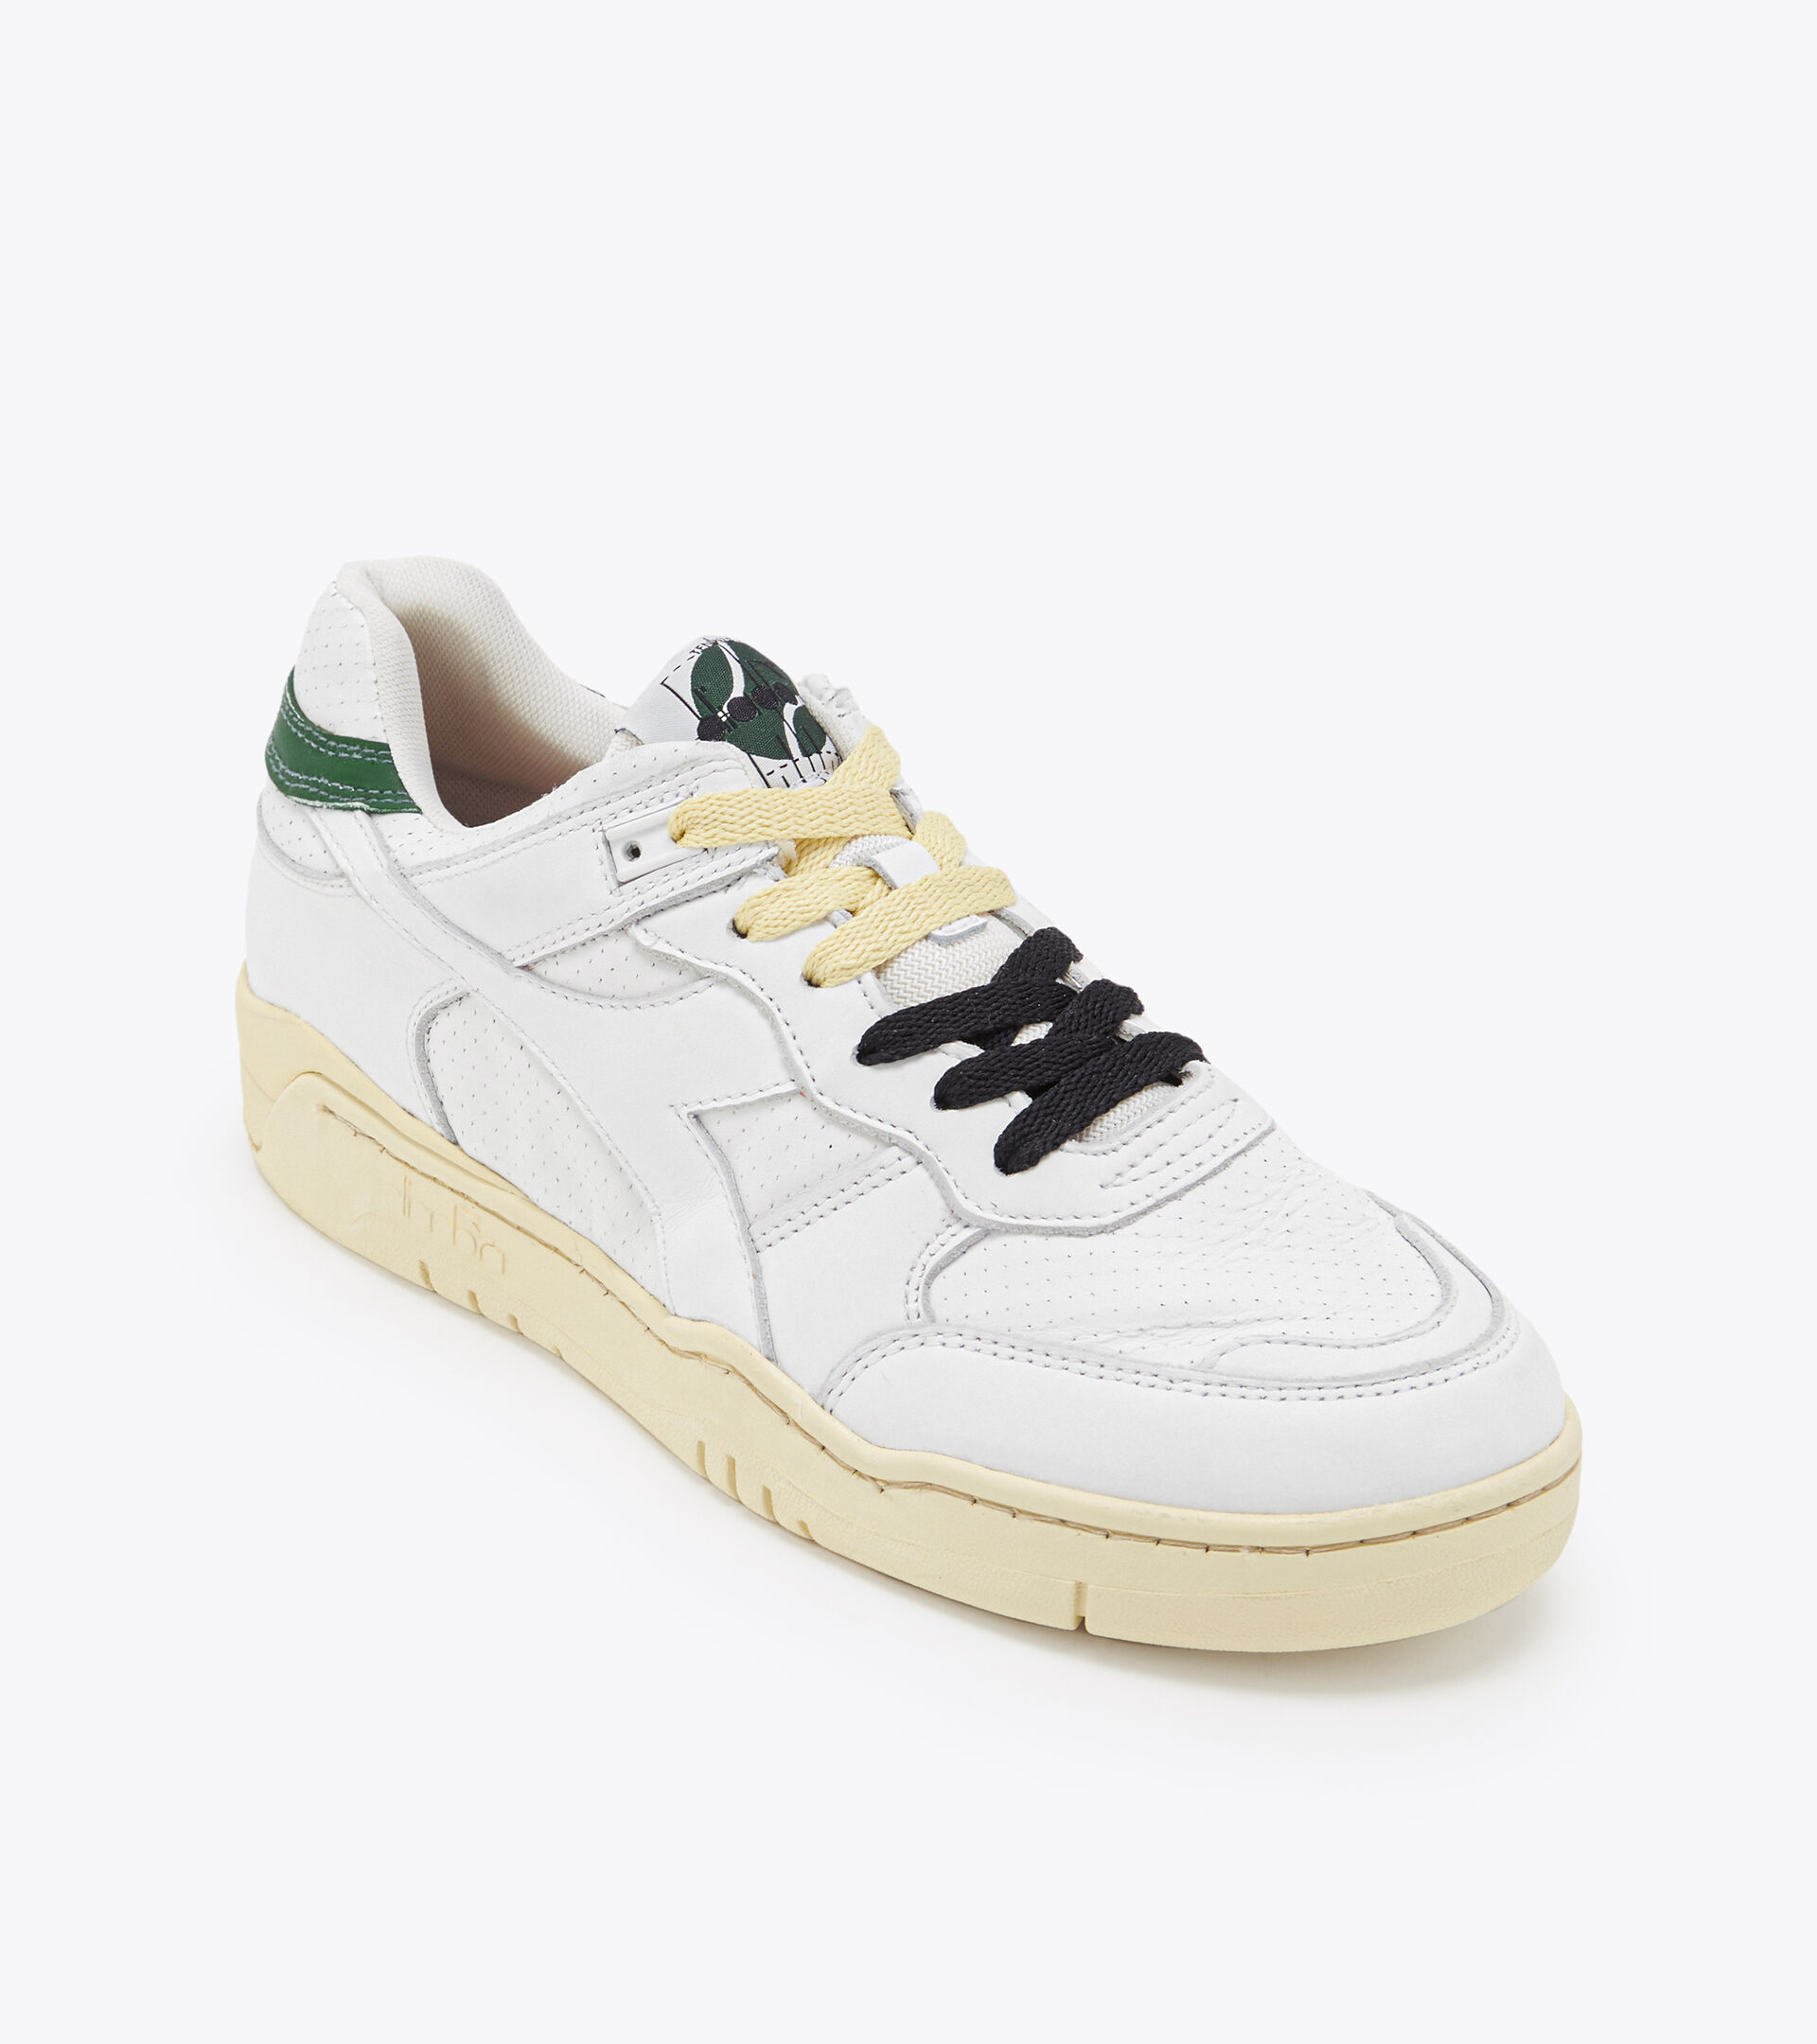 Heritage-Schuh Made in Italy - Gender neutral B.560 CORK USED ITALIA MARSHMALLOW WEISS - Diadora